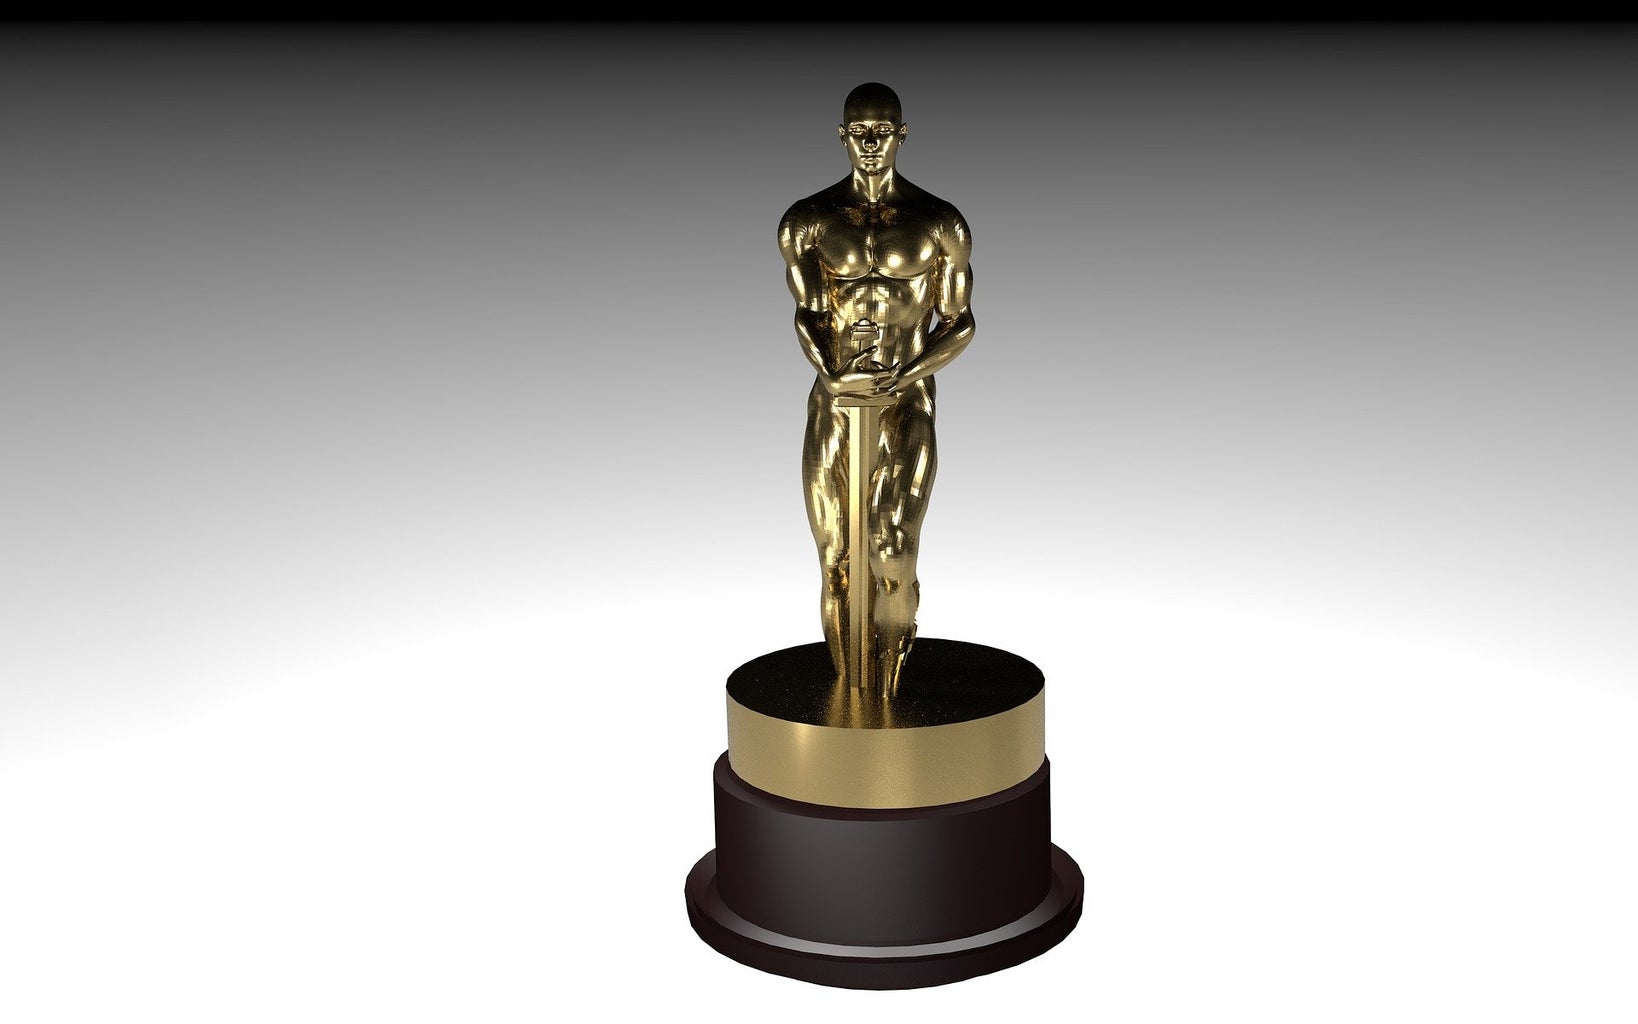 oscar 2103653 1920?width=1024&height=1024&fit=cover&auto=webp